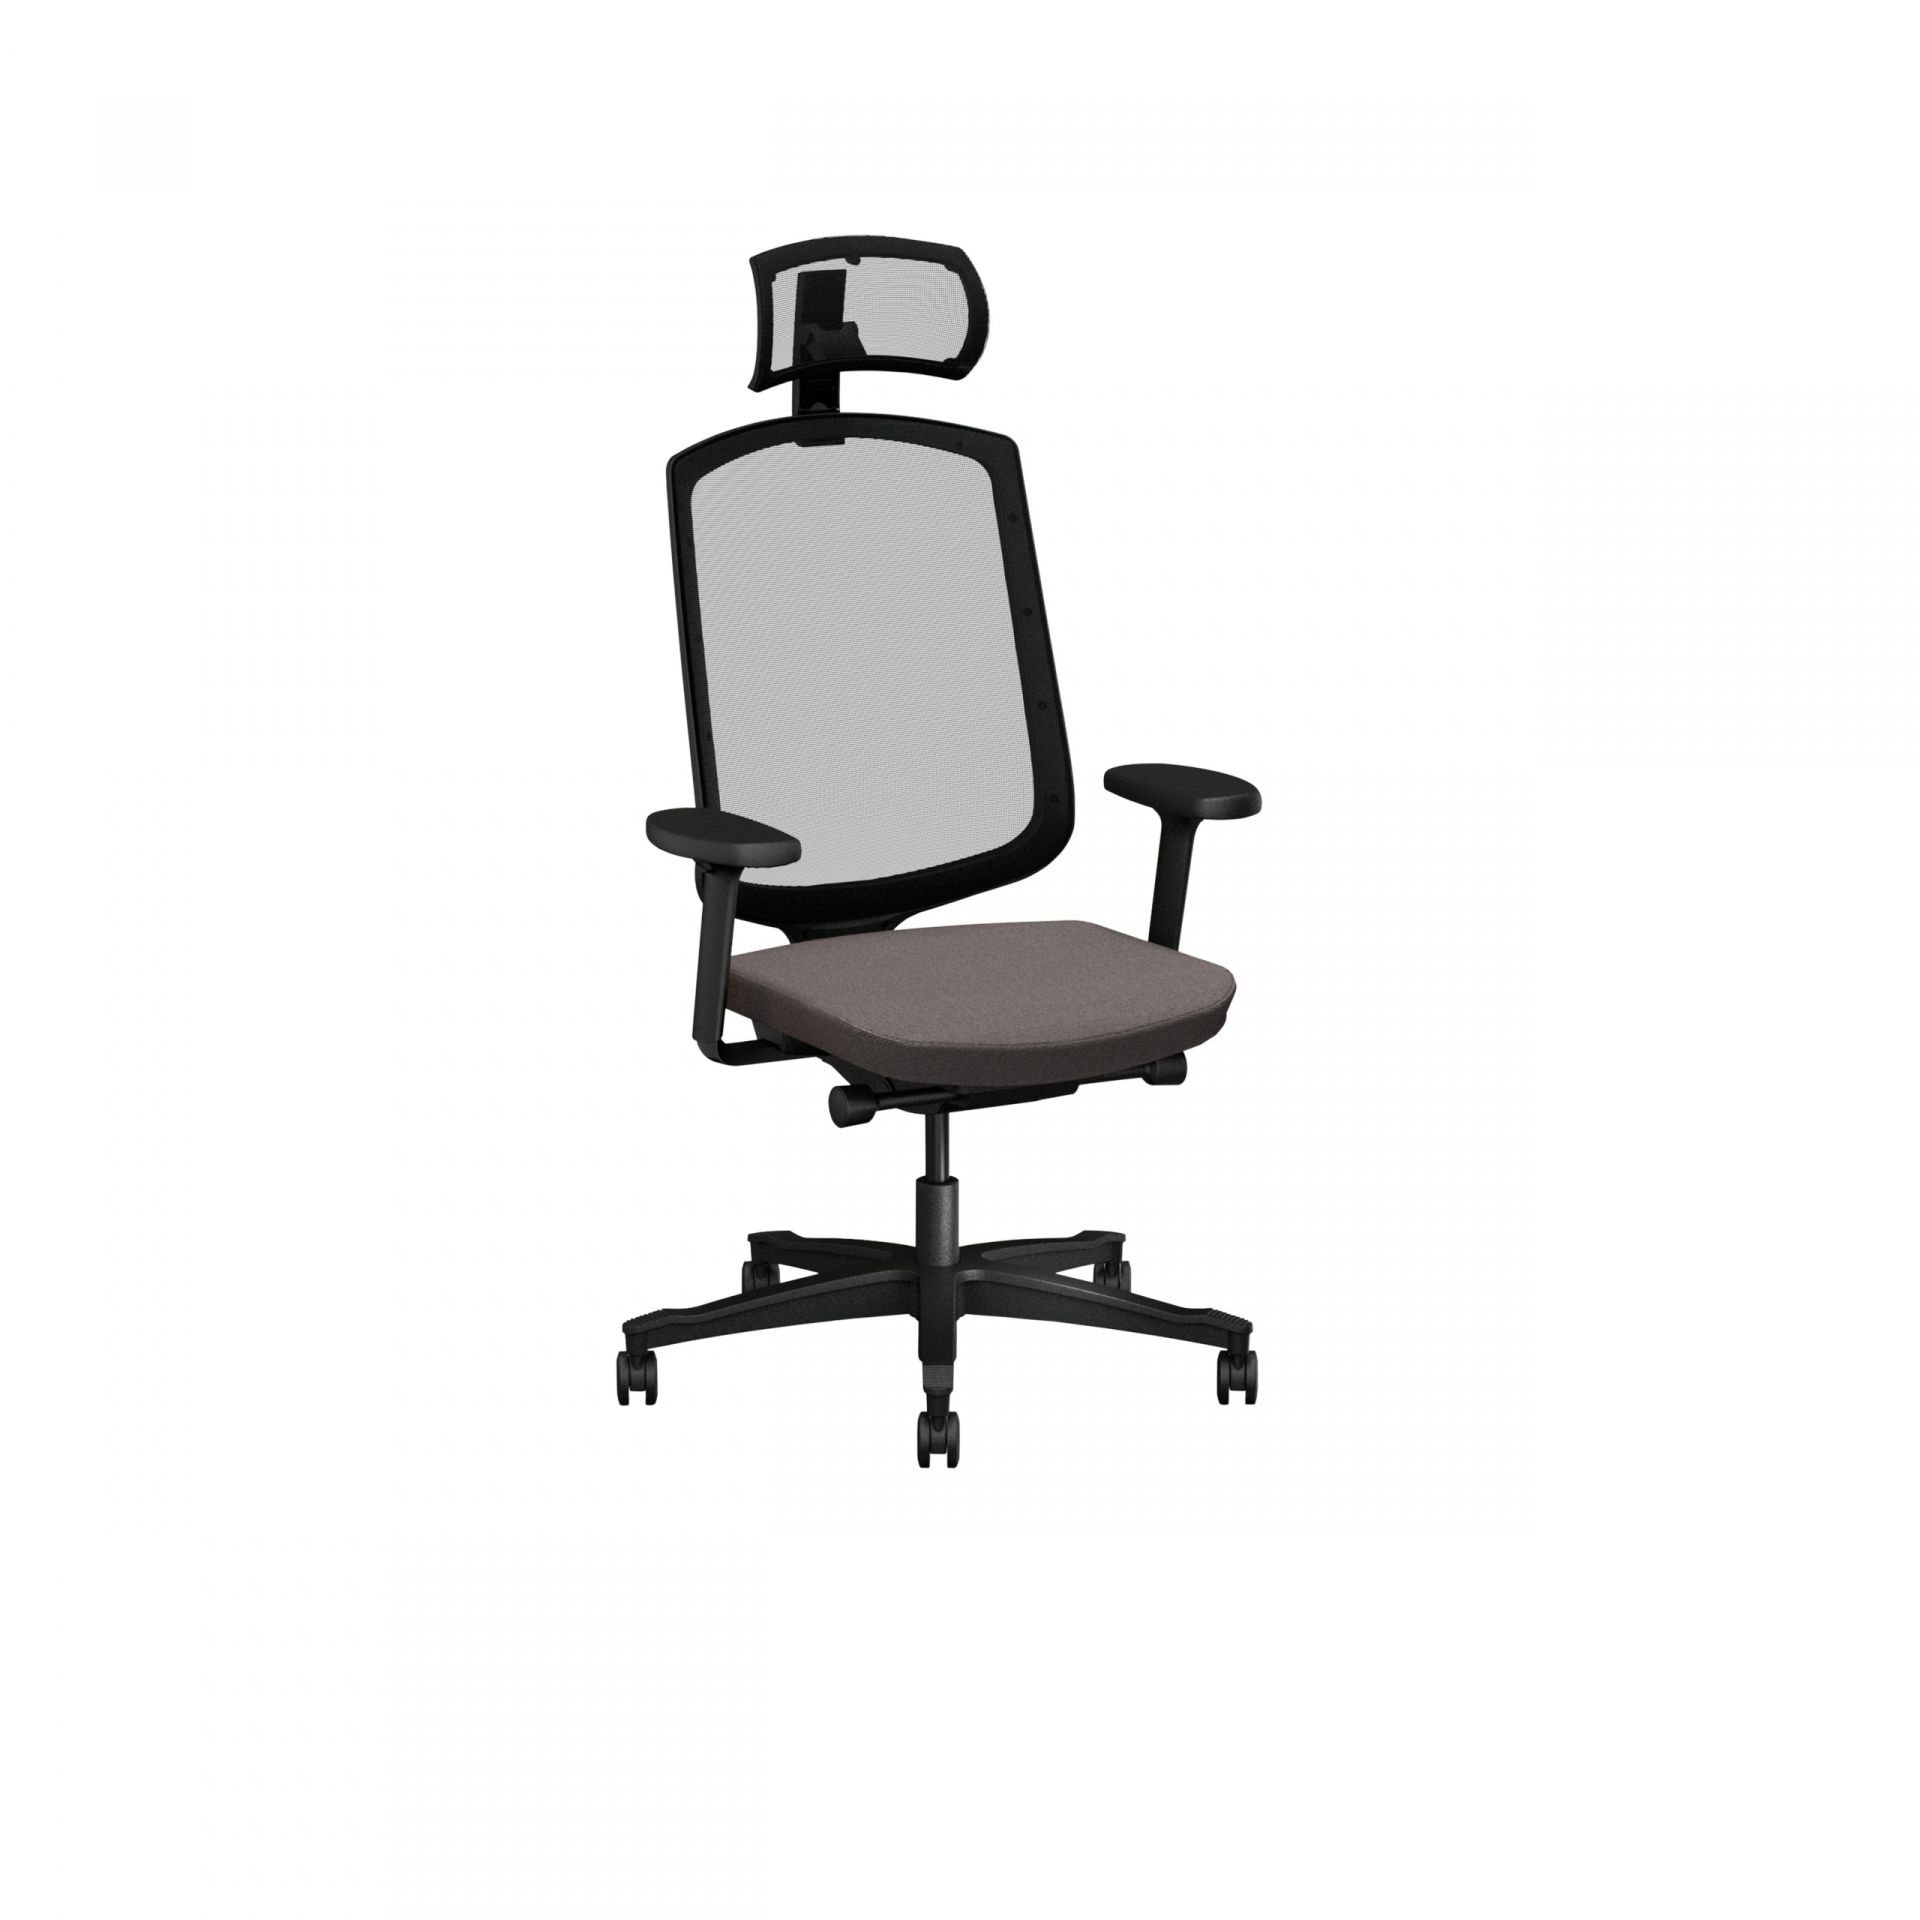 One Office chair with mesh back